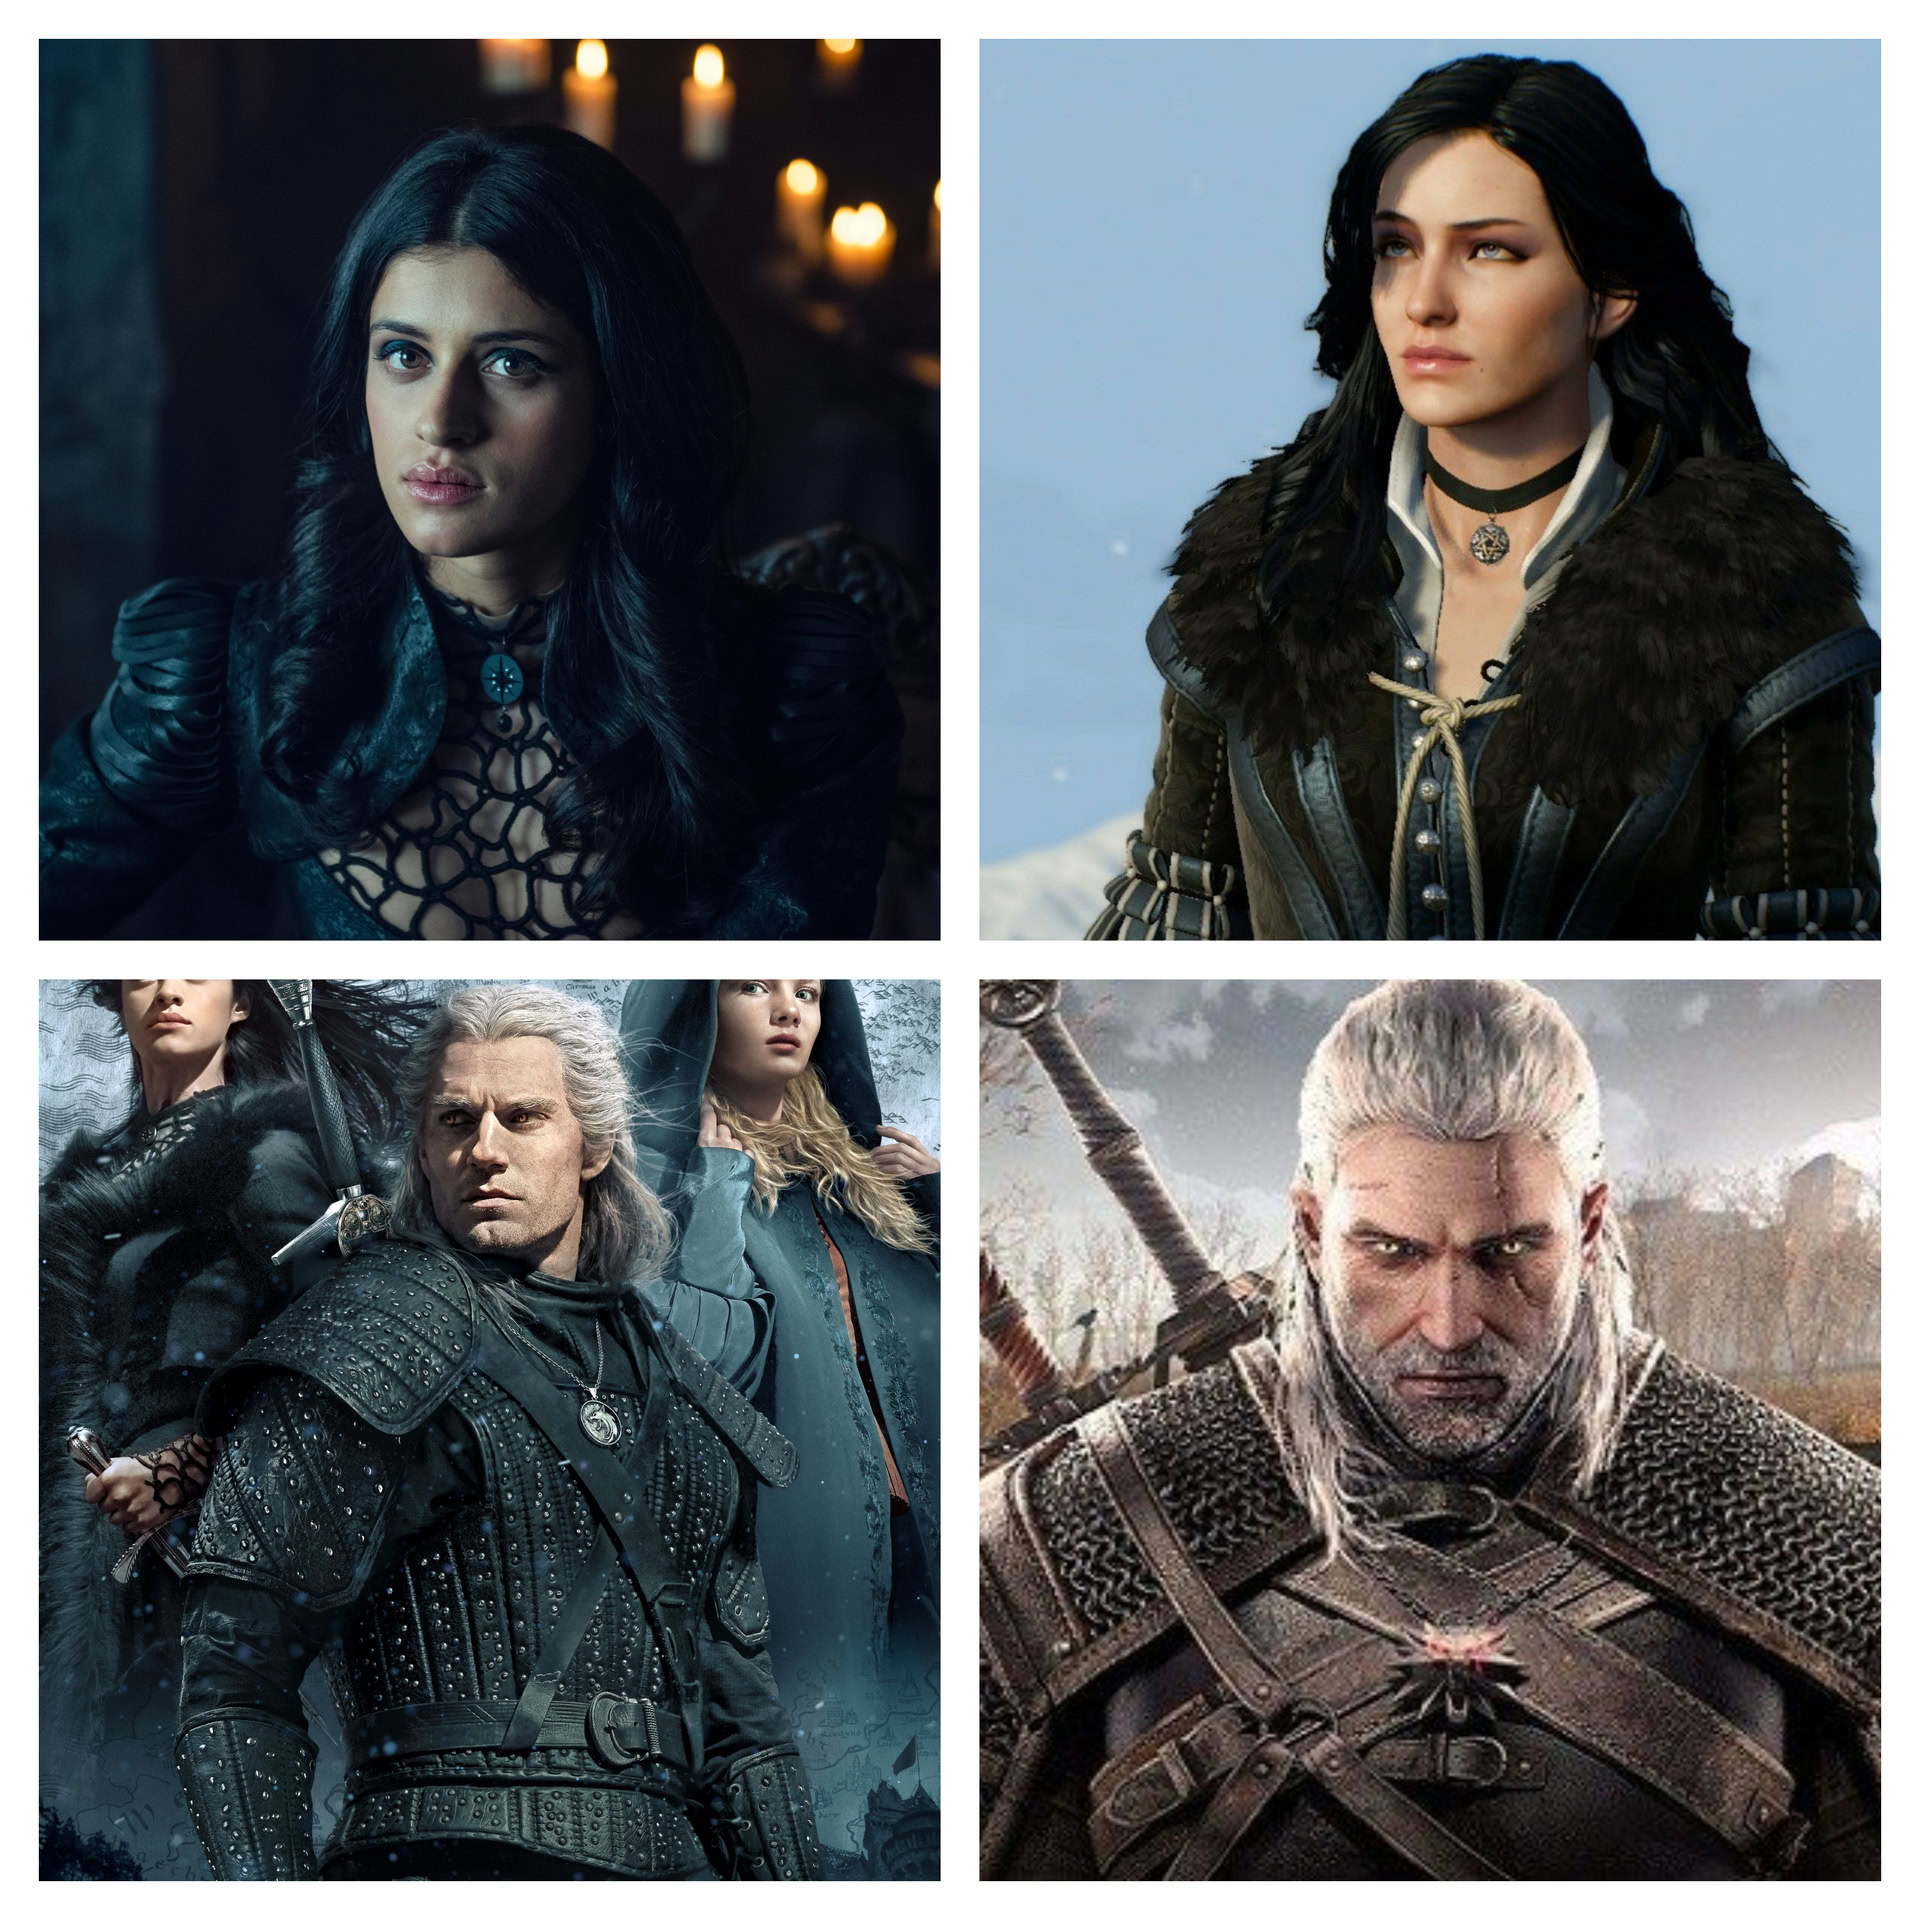 The Witcher Netflix review: What we loved and hated - Android